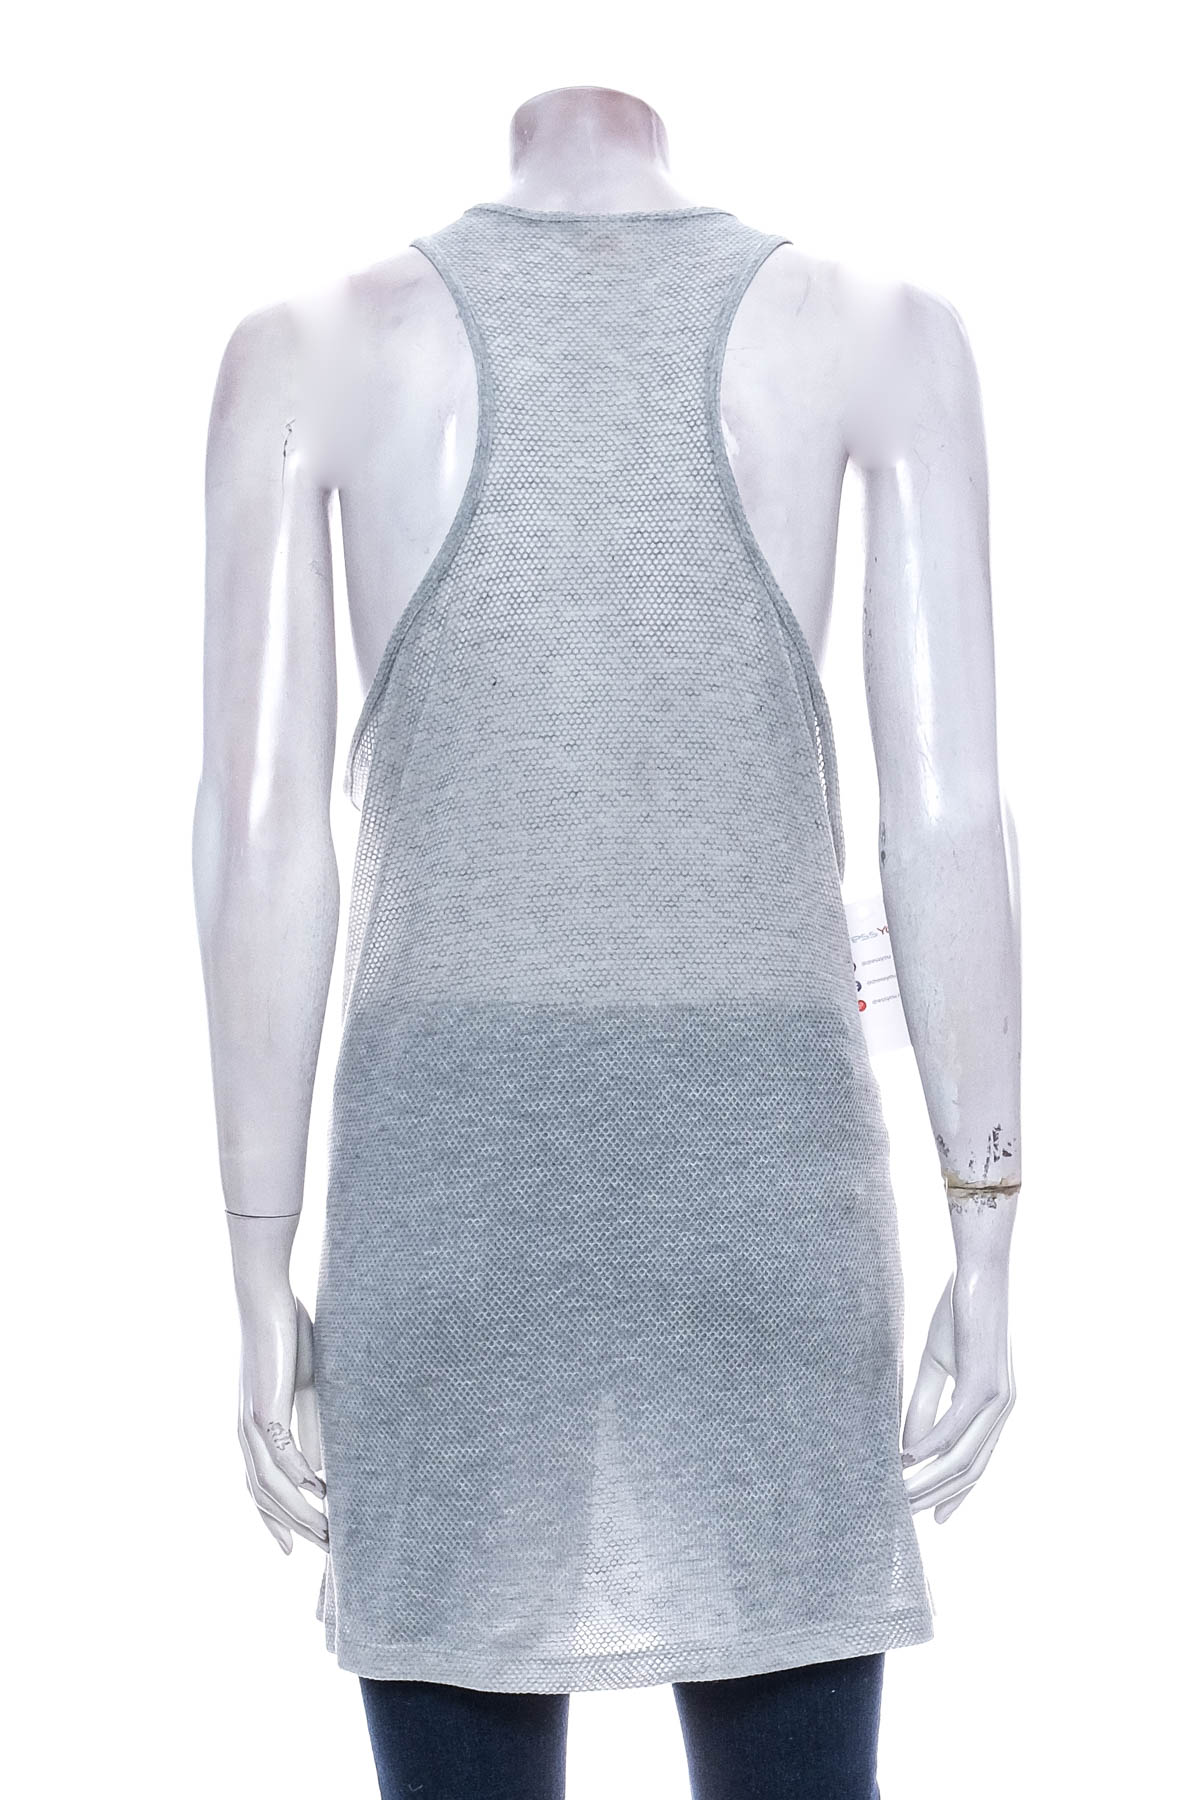 Women's tunic - Active LIMITED by Tchibo - 1